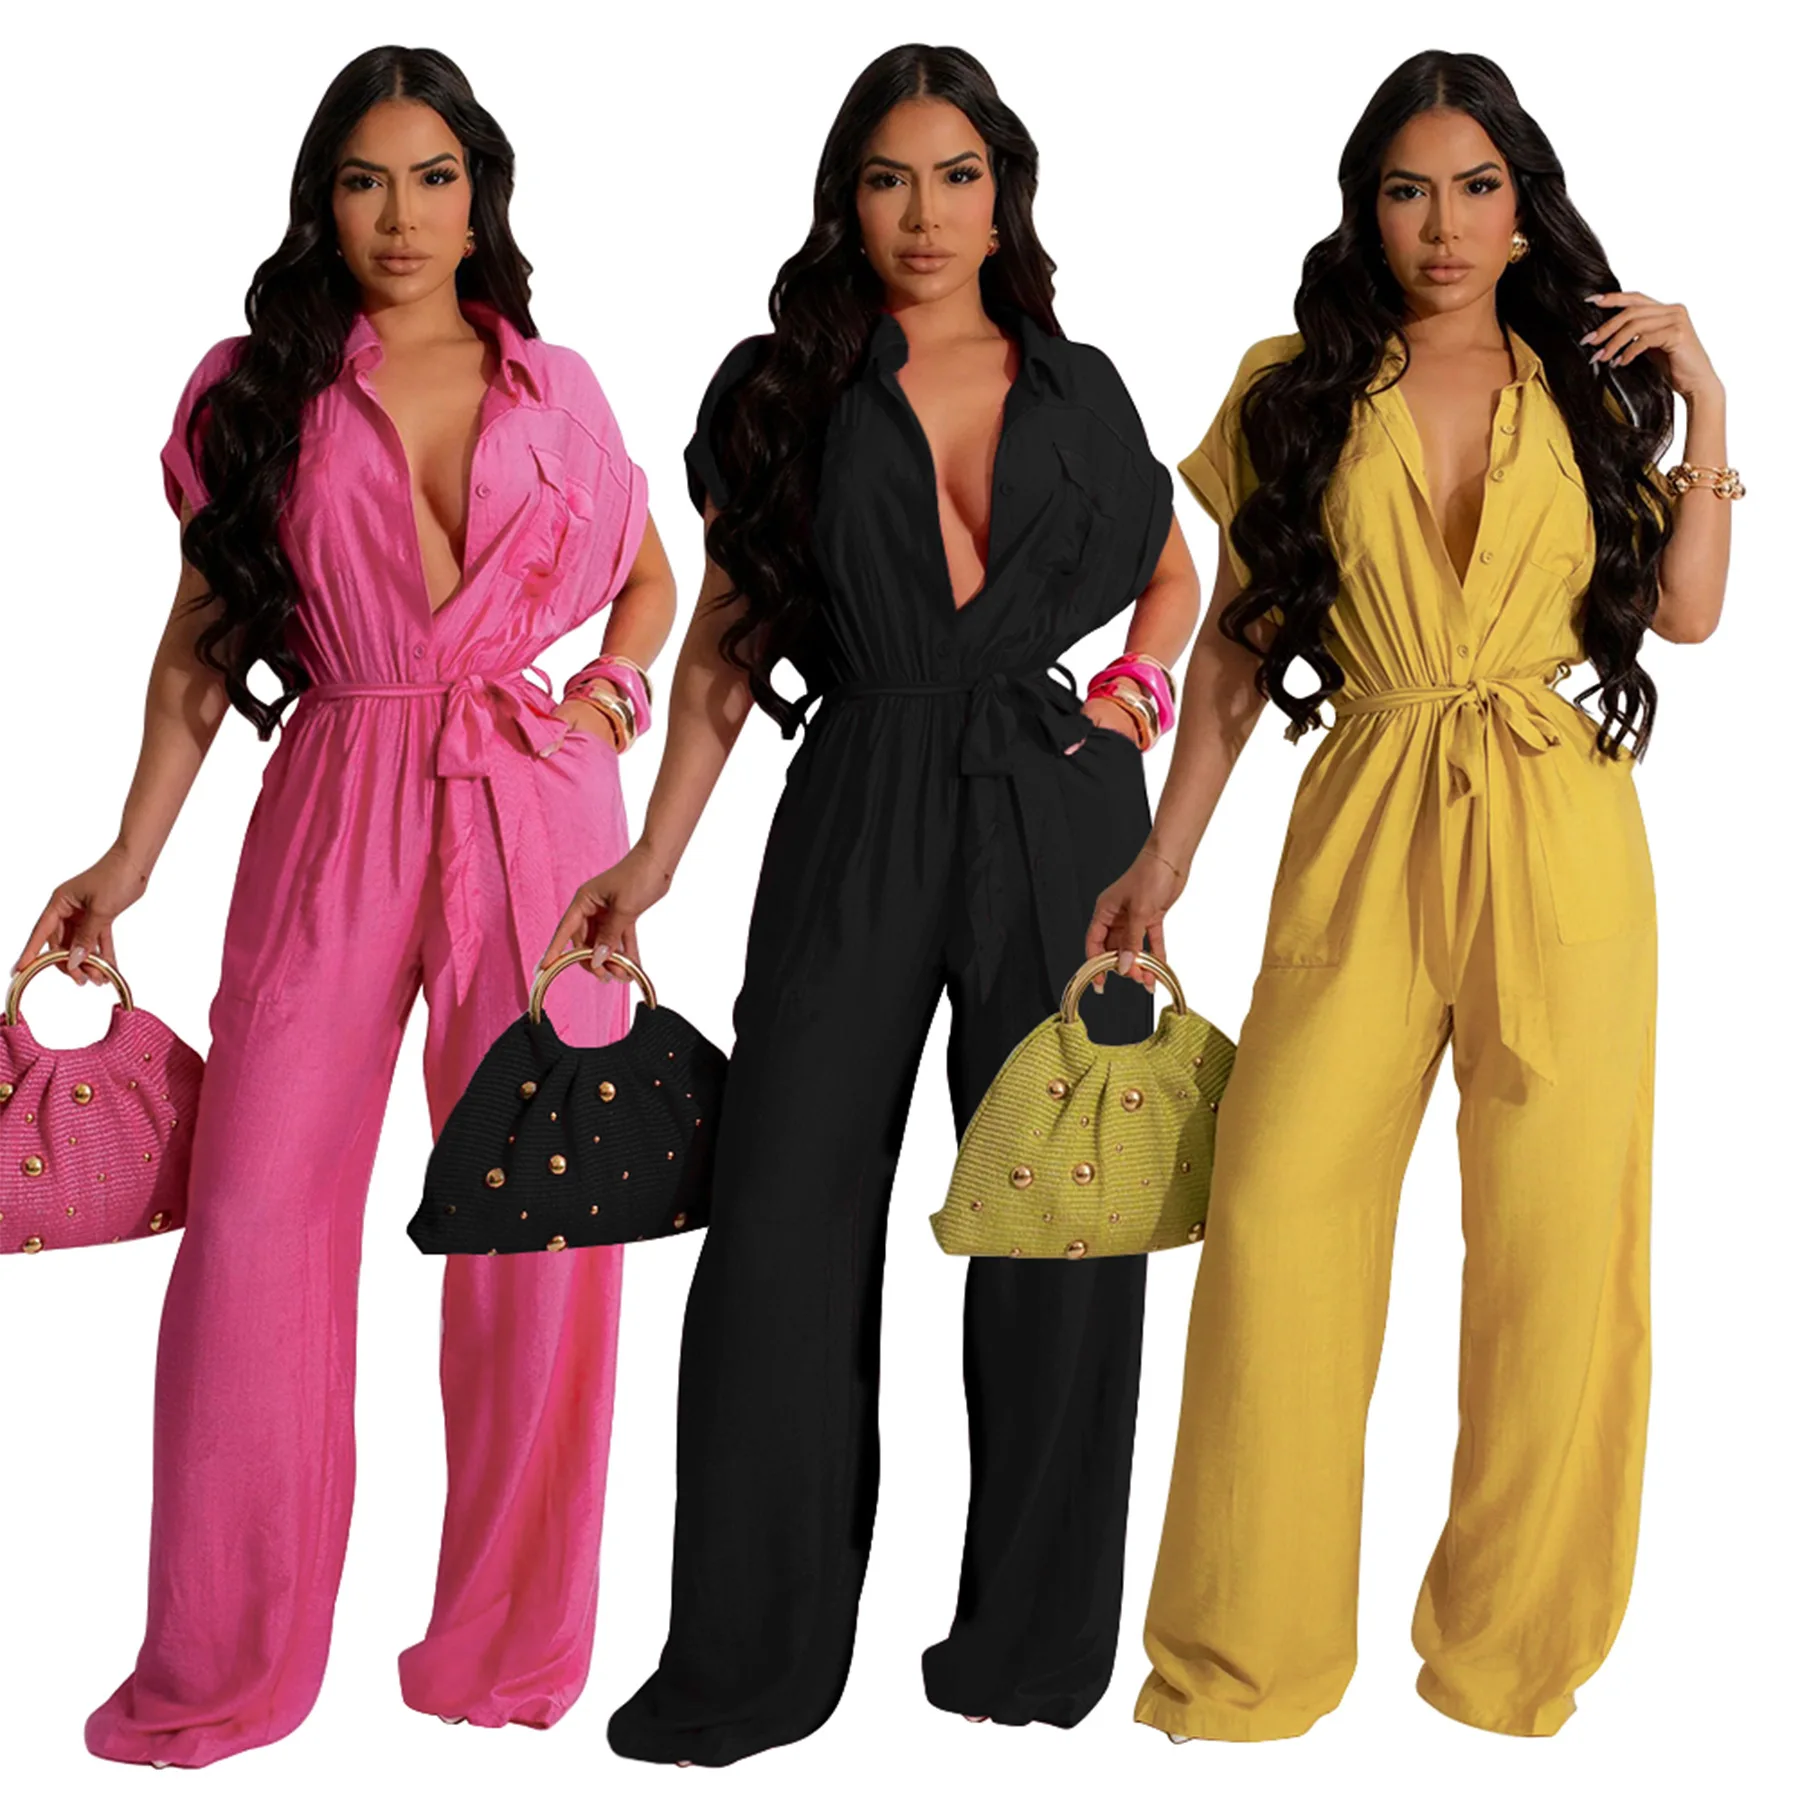 

Women Solid Casual Linen Jumpsuit Elegant Pockets Turn Down Collar Short Sleeve Single Breasted Sash Wide Leg Pants Overalls